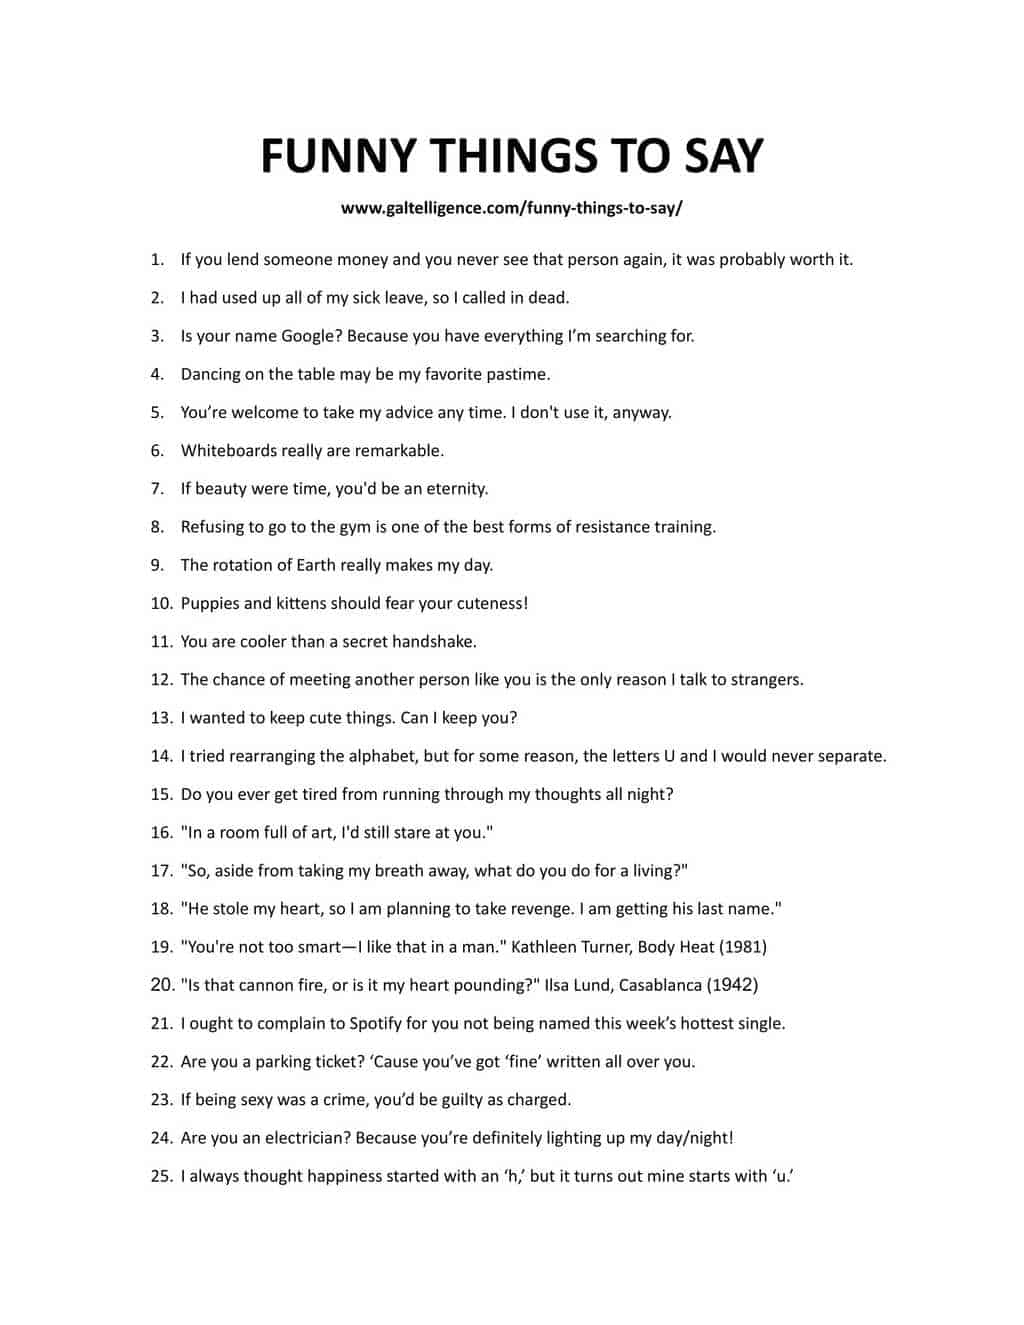 Downloadable and printable list of things to say